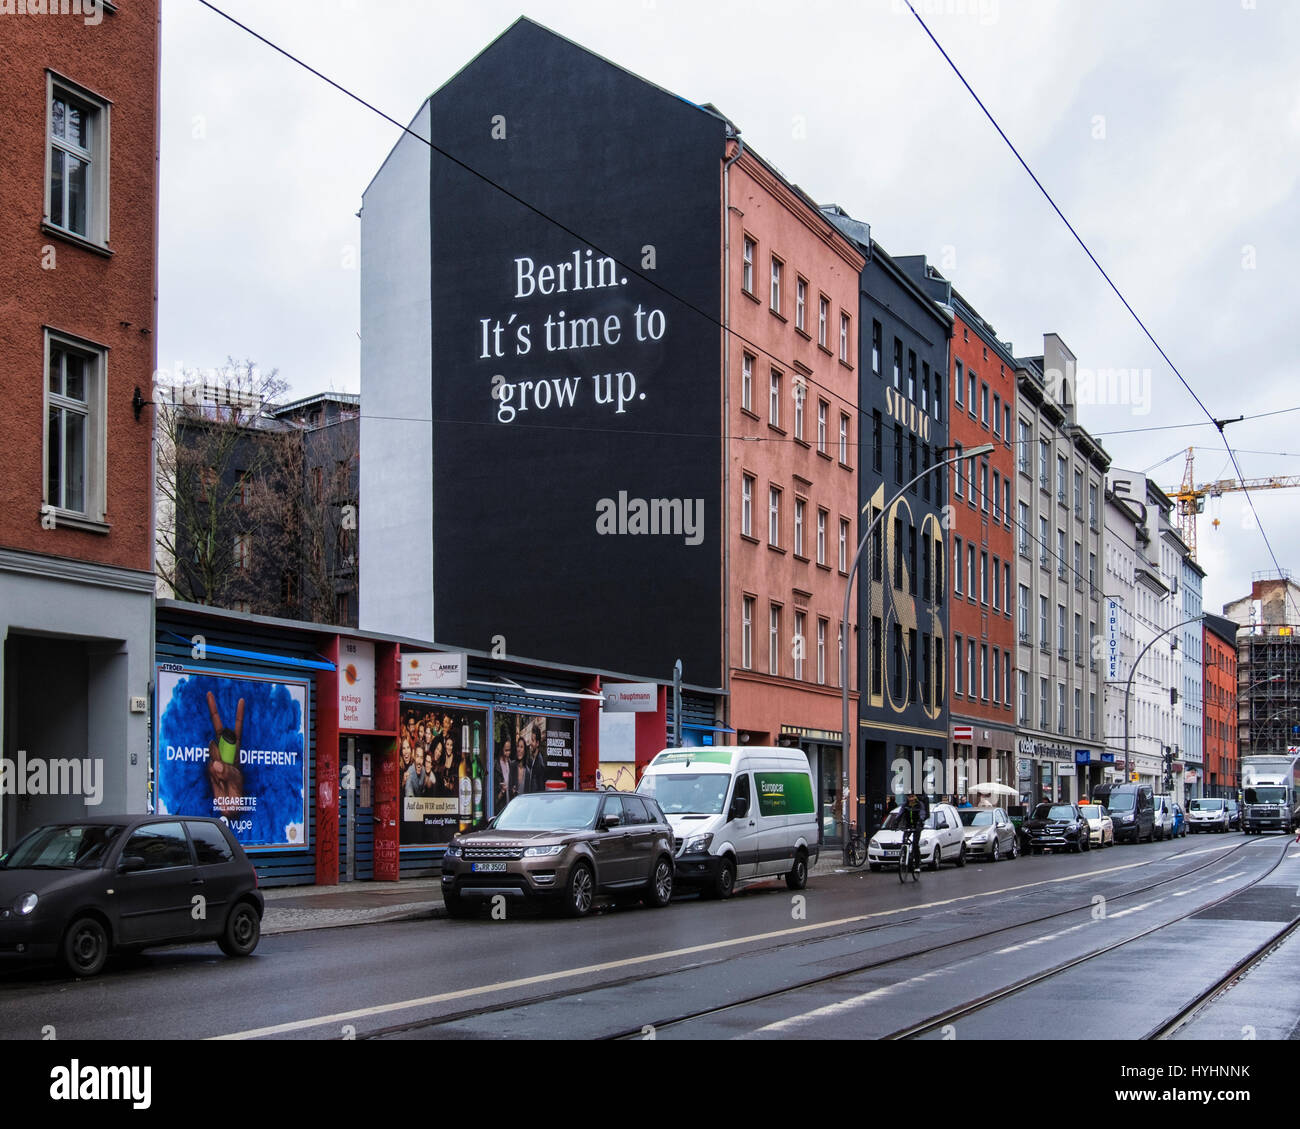 Berlin, Mitte. Mercedes Benz mural advertisement with advertising slogan 'Berlin it's time to grow up'. Luxury motor car ad in city street. Stock Photo